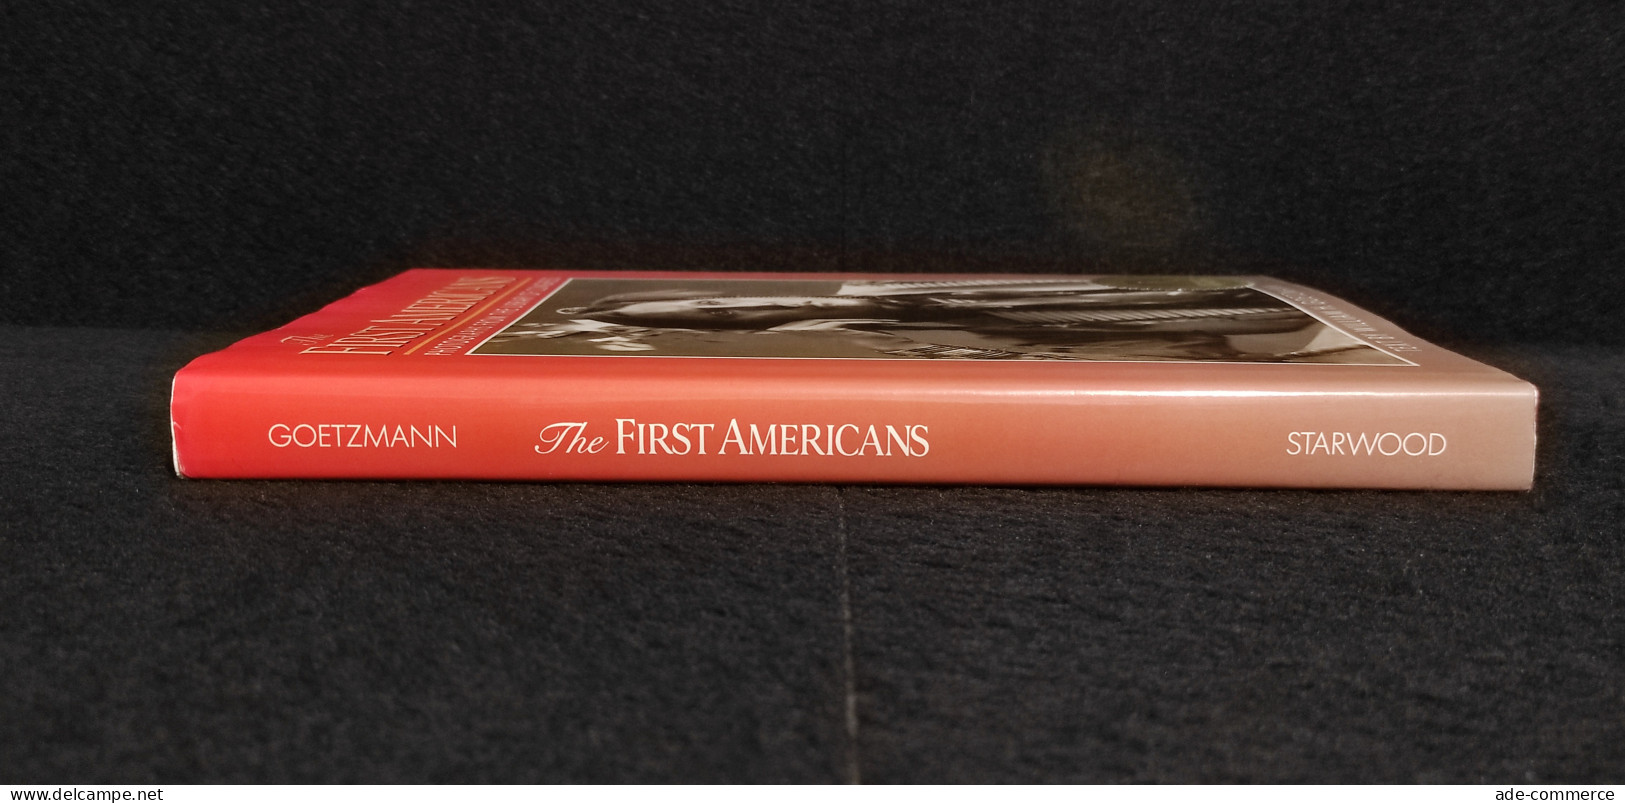 The First Americans - Photographs From Library Of Congress - 1991 - Fotografie